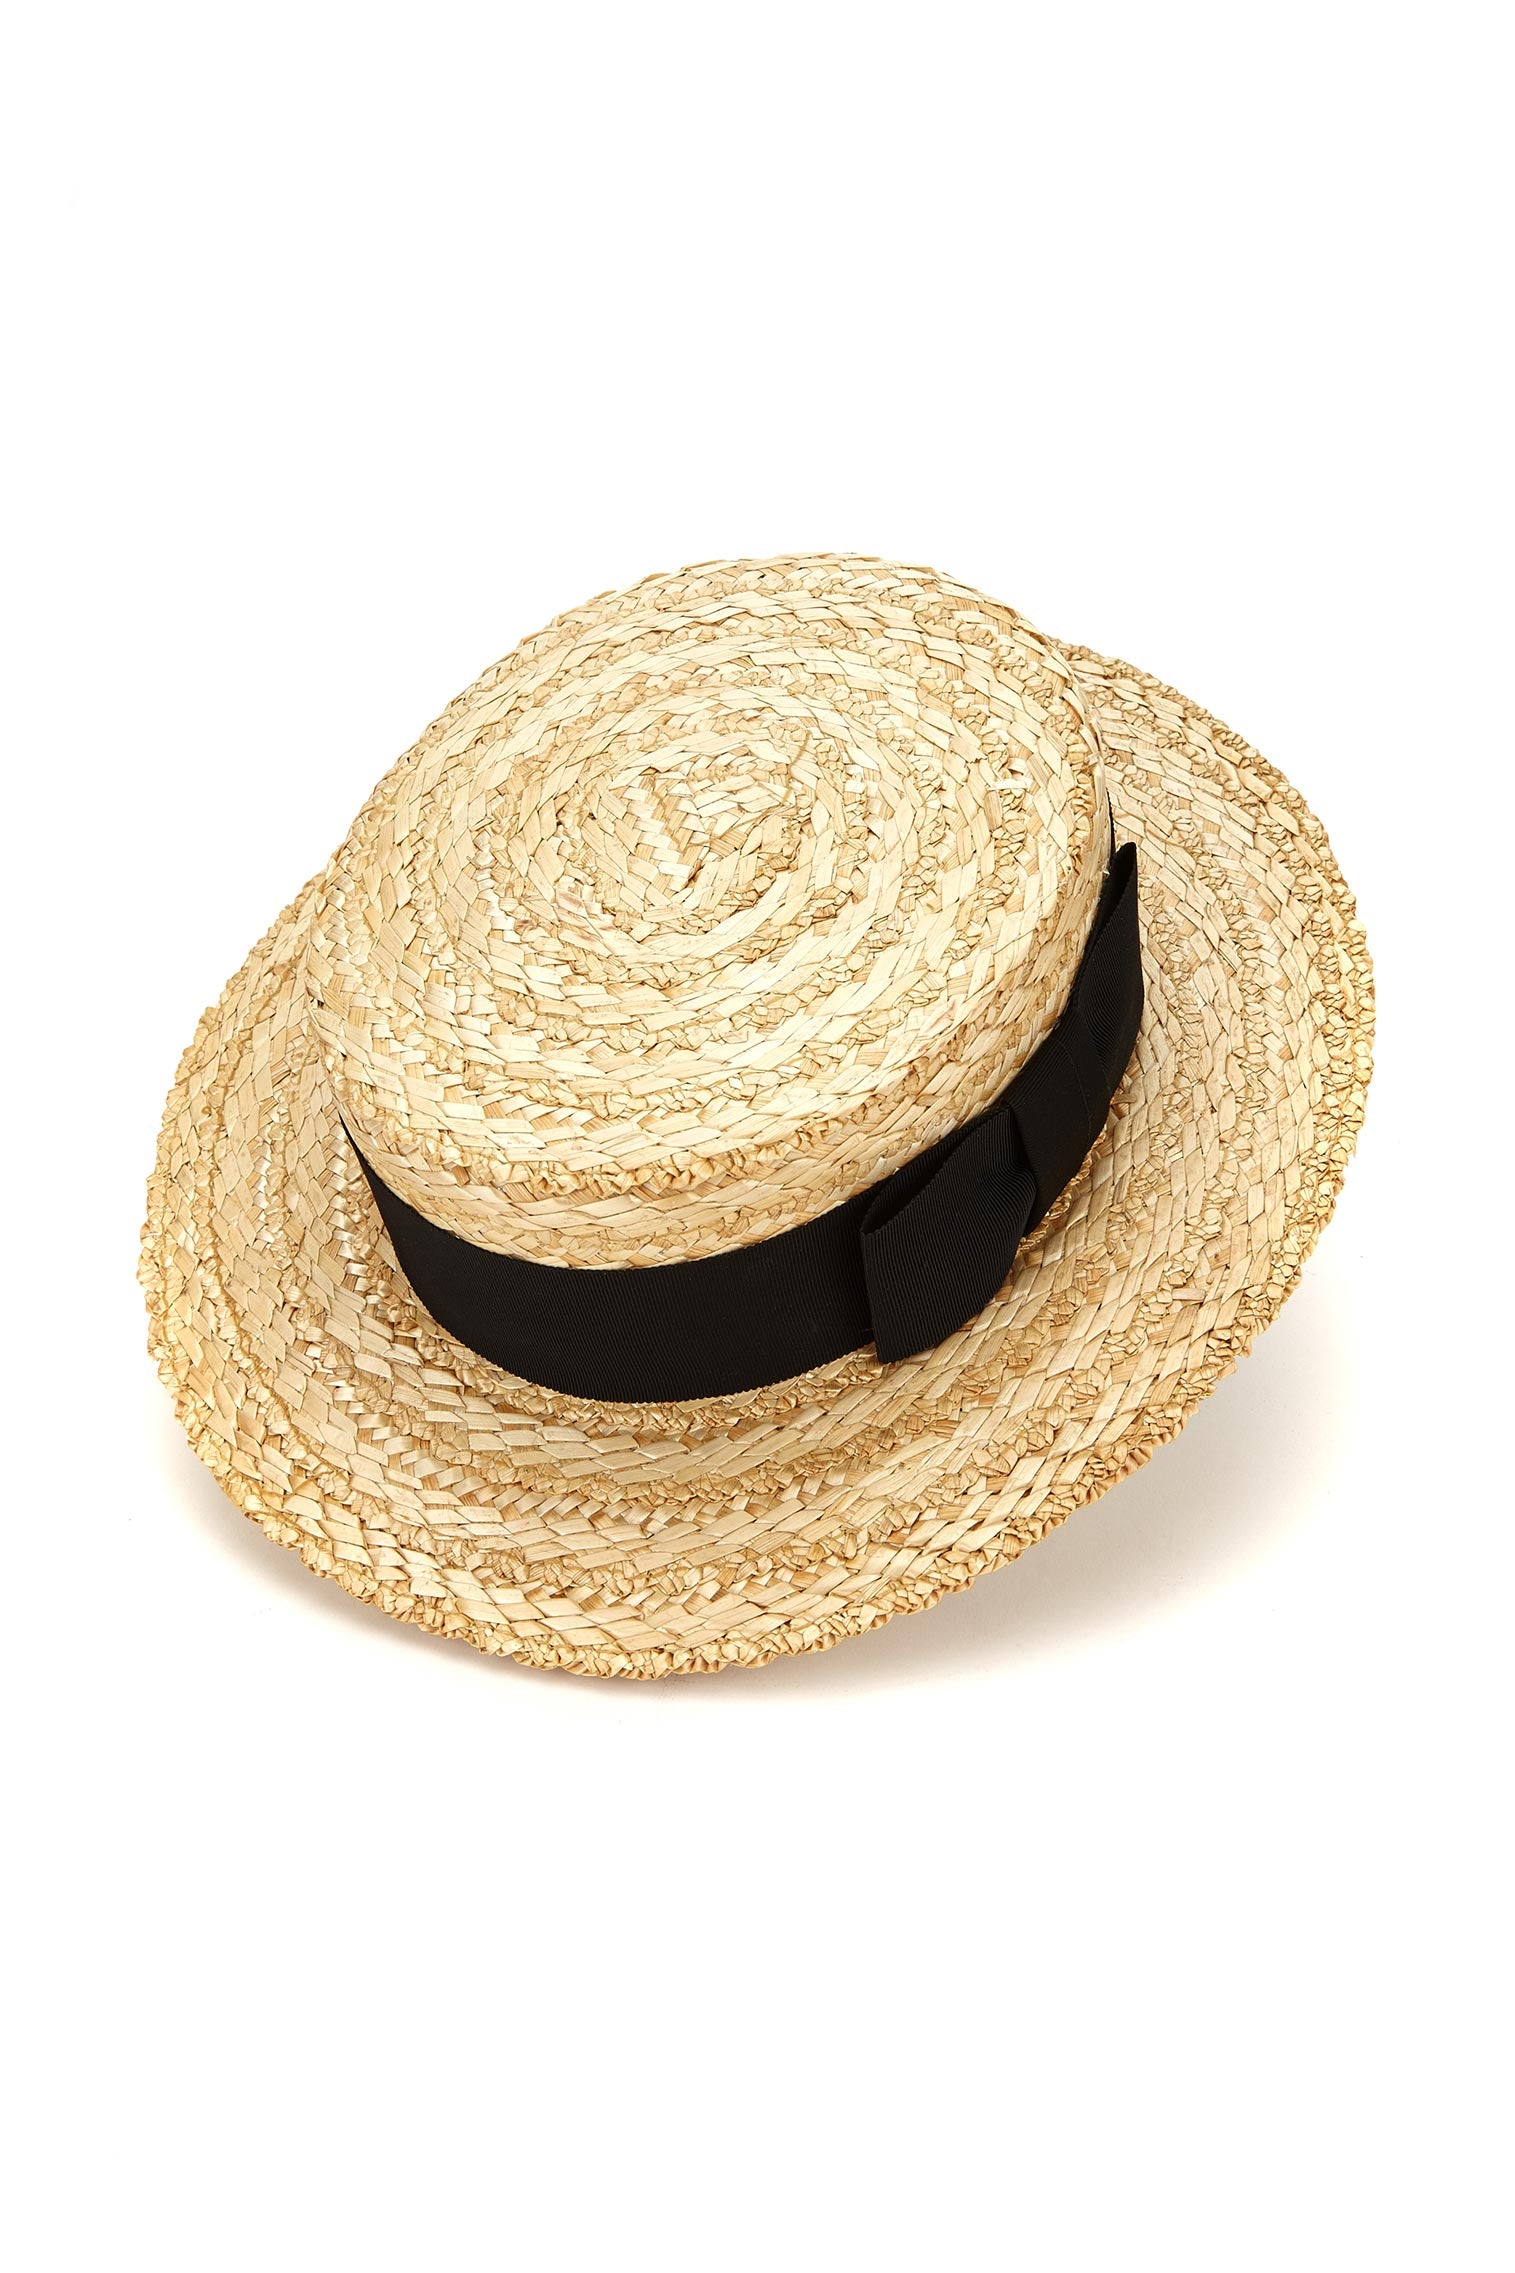 Classic Boater - Father's Day Gift Guide - Lock & Co. Hatters London UK